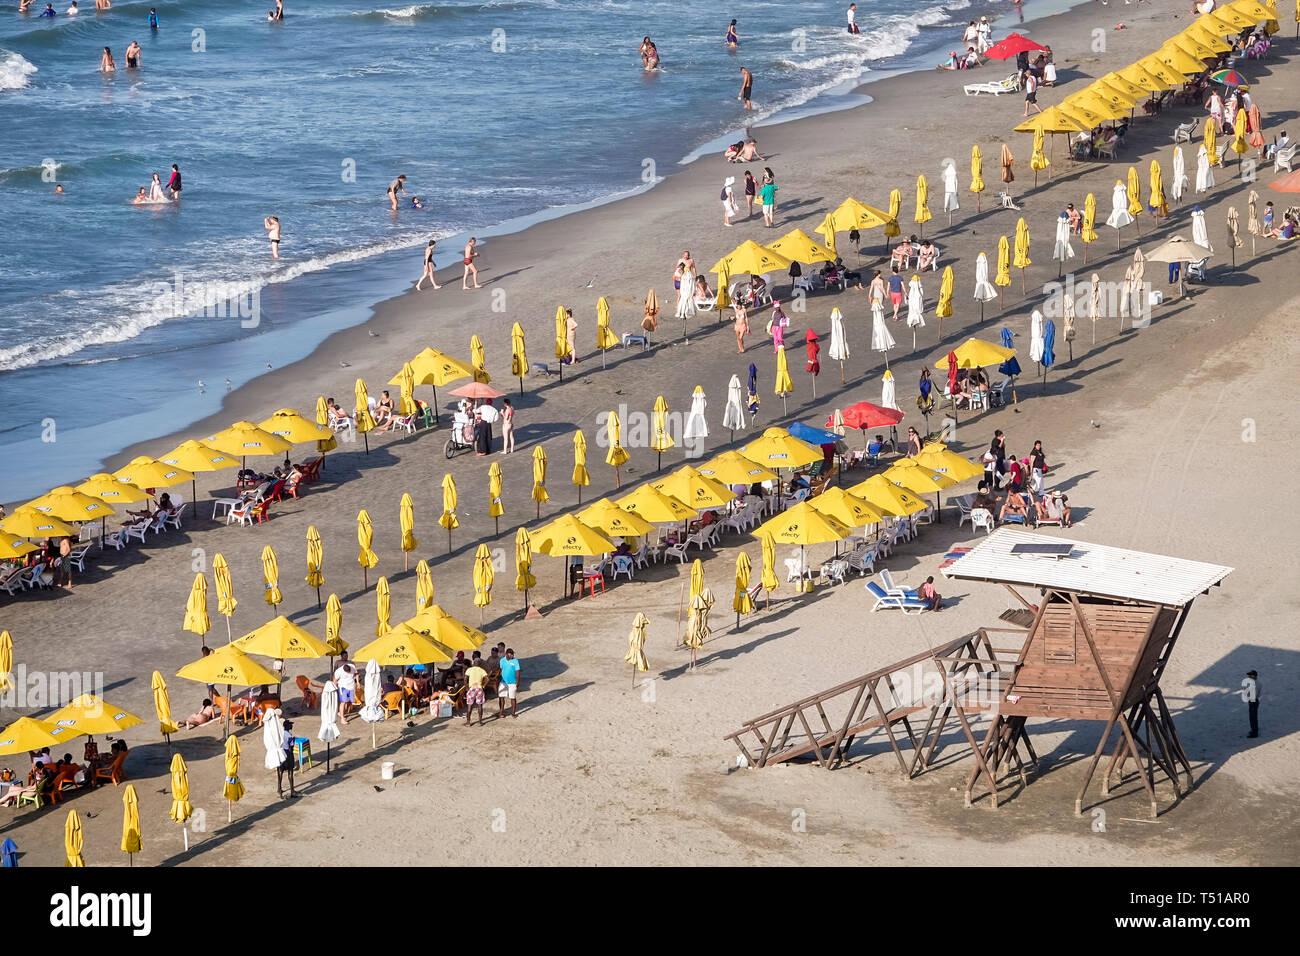 Cartagena Colombia,Bocagrande,Caribbean Sea public beach,sand water,umbrellas yellow rental,Hispanic resident residents,waves,unoccupied,crowded toget Stock Photo